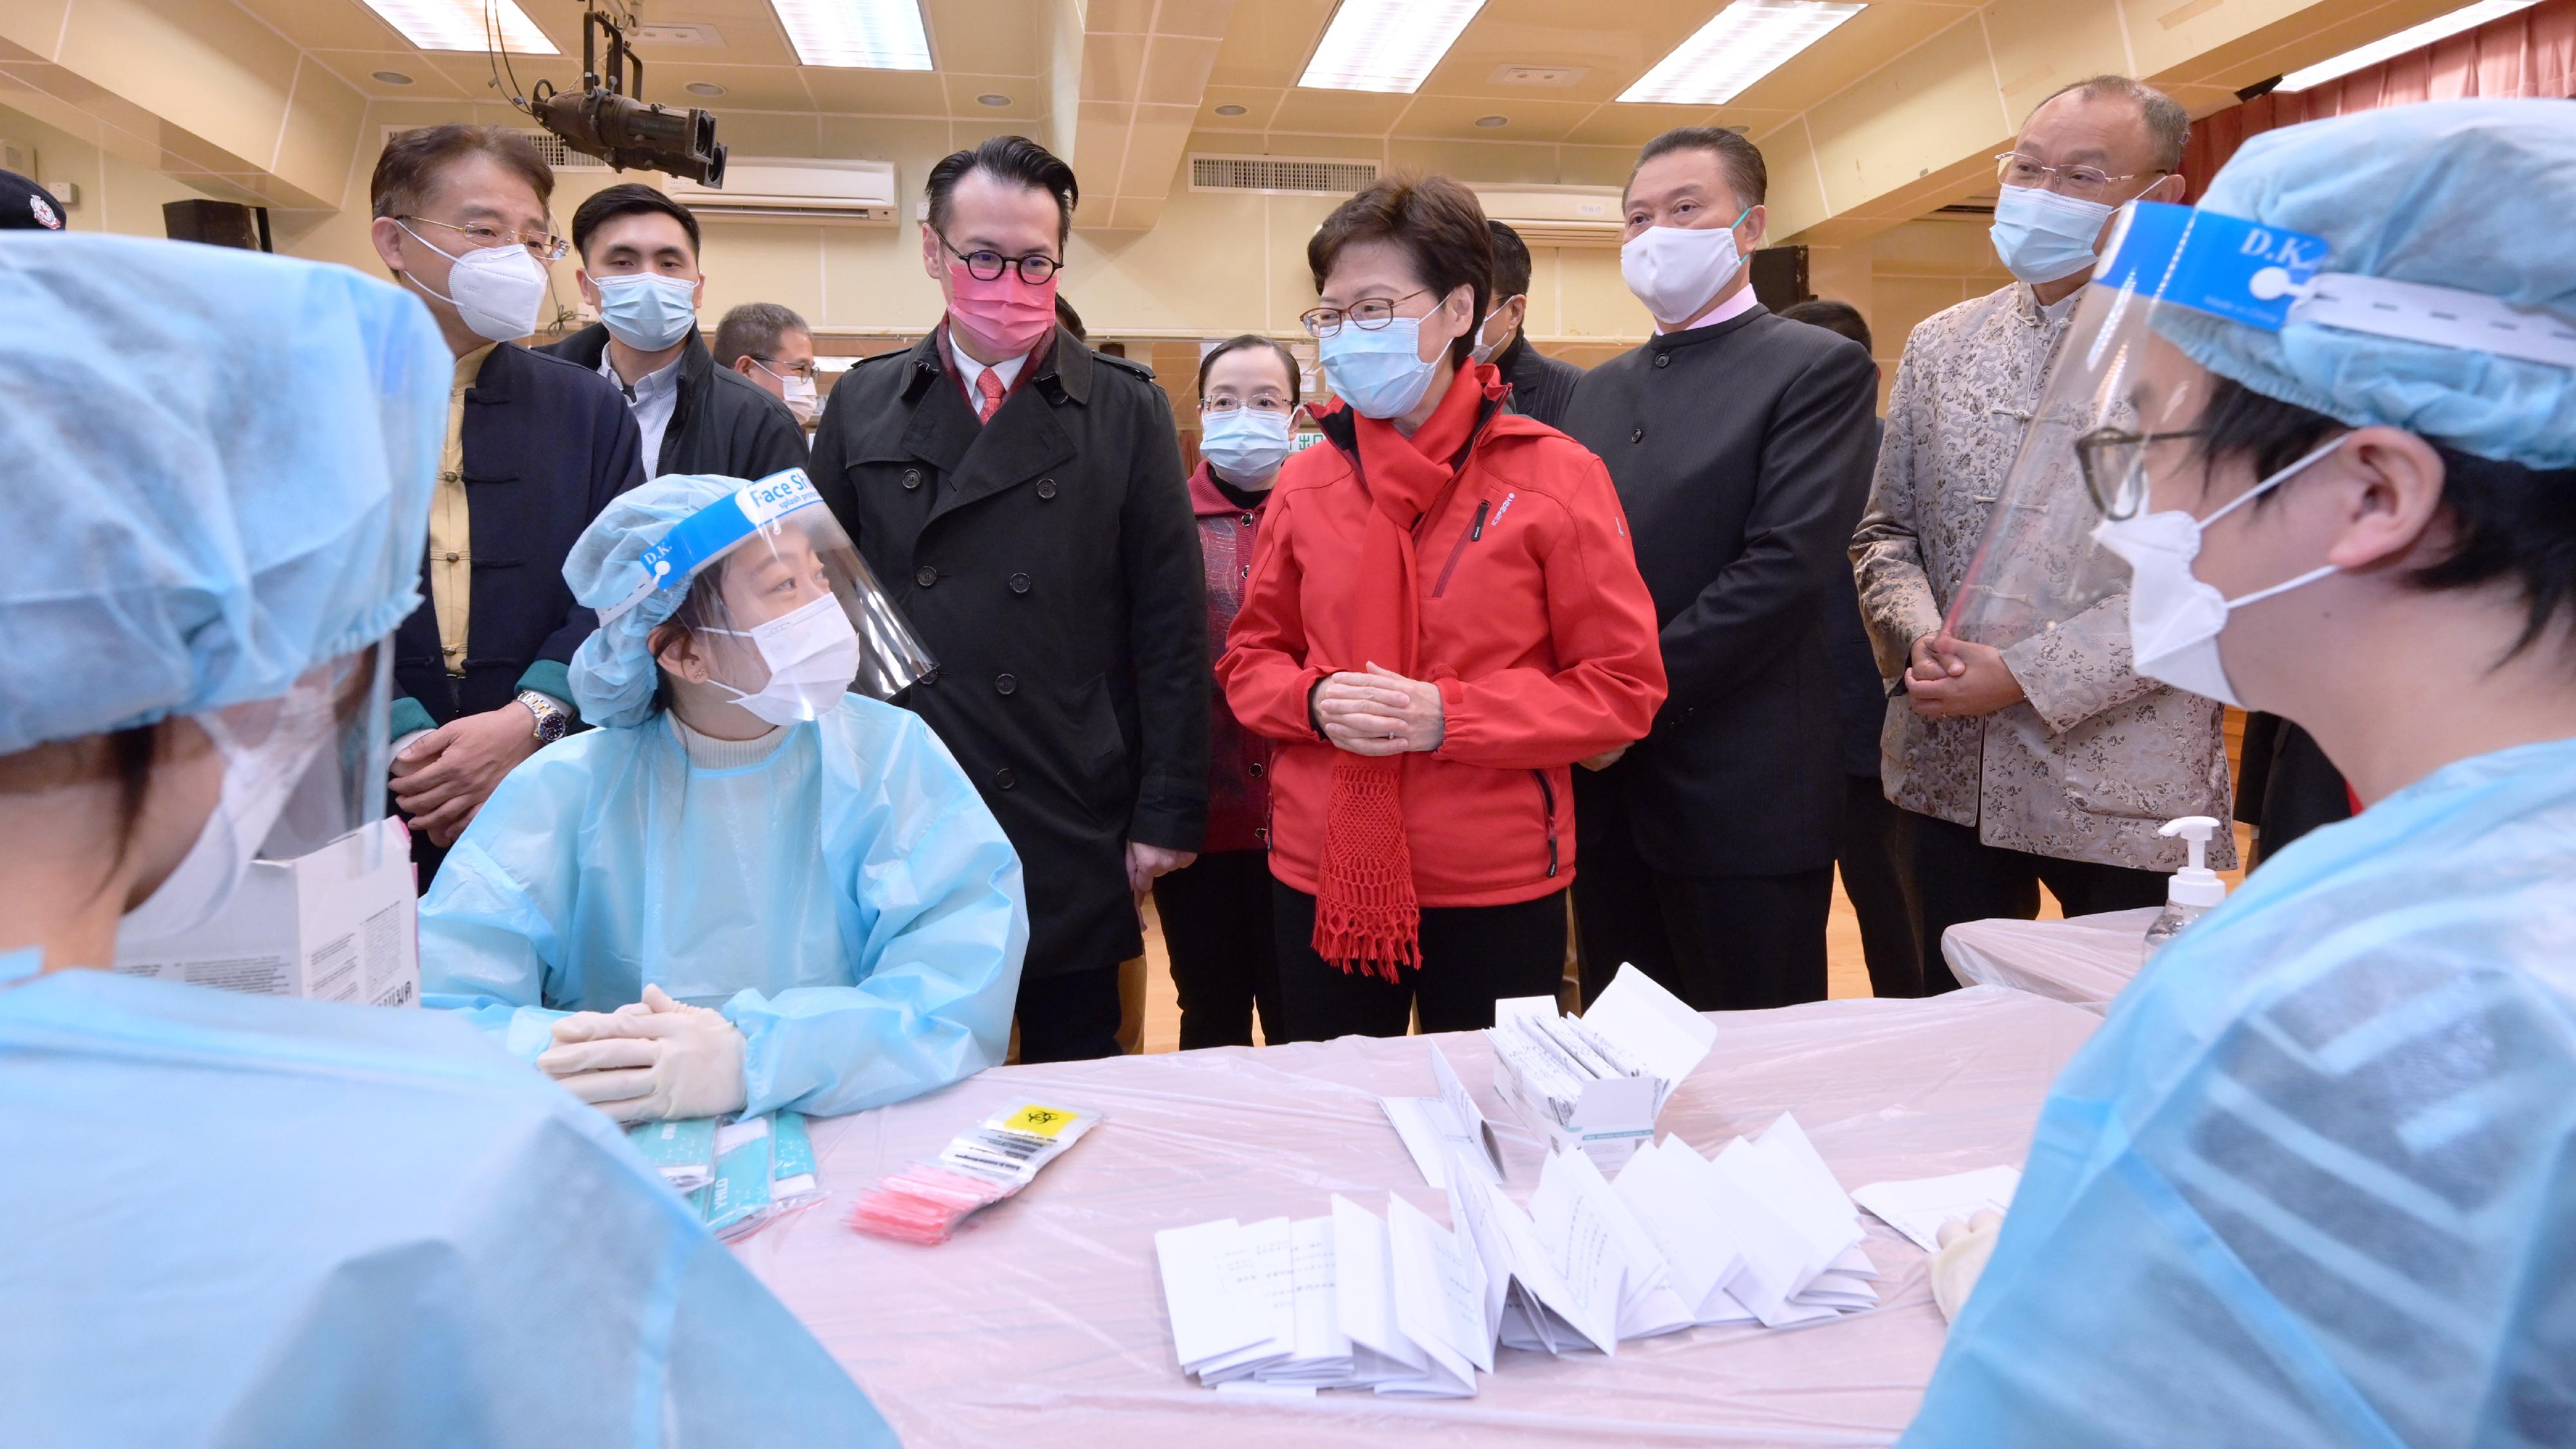 The Chief Executive, Mrs Carrie Lam, visited volunteers helping with the packing of rapid test kits at Kwun Tong Community Centre today (February 2). Photo shows Mrs Lam (third right) chatting with volunteers. Looking on are the District Officer (Kwun Tong), Mr Steve Tse (third left), and the Acting Director of Home Affairs, Miss Vega Wong (centre).